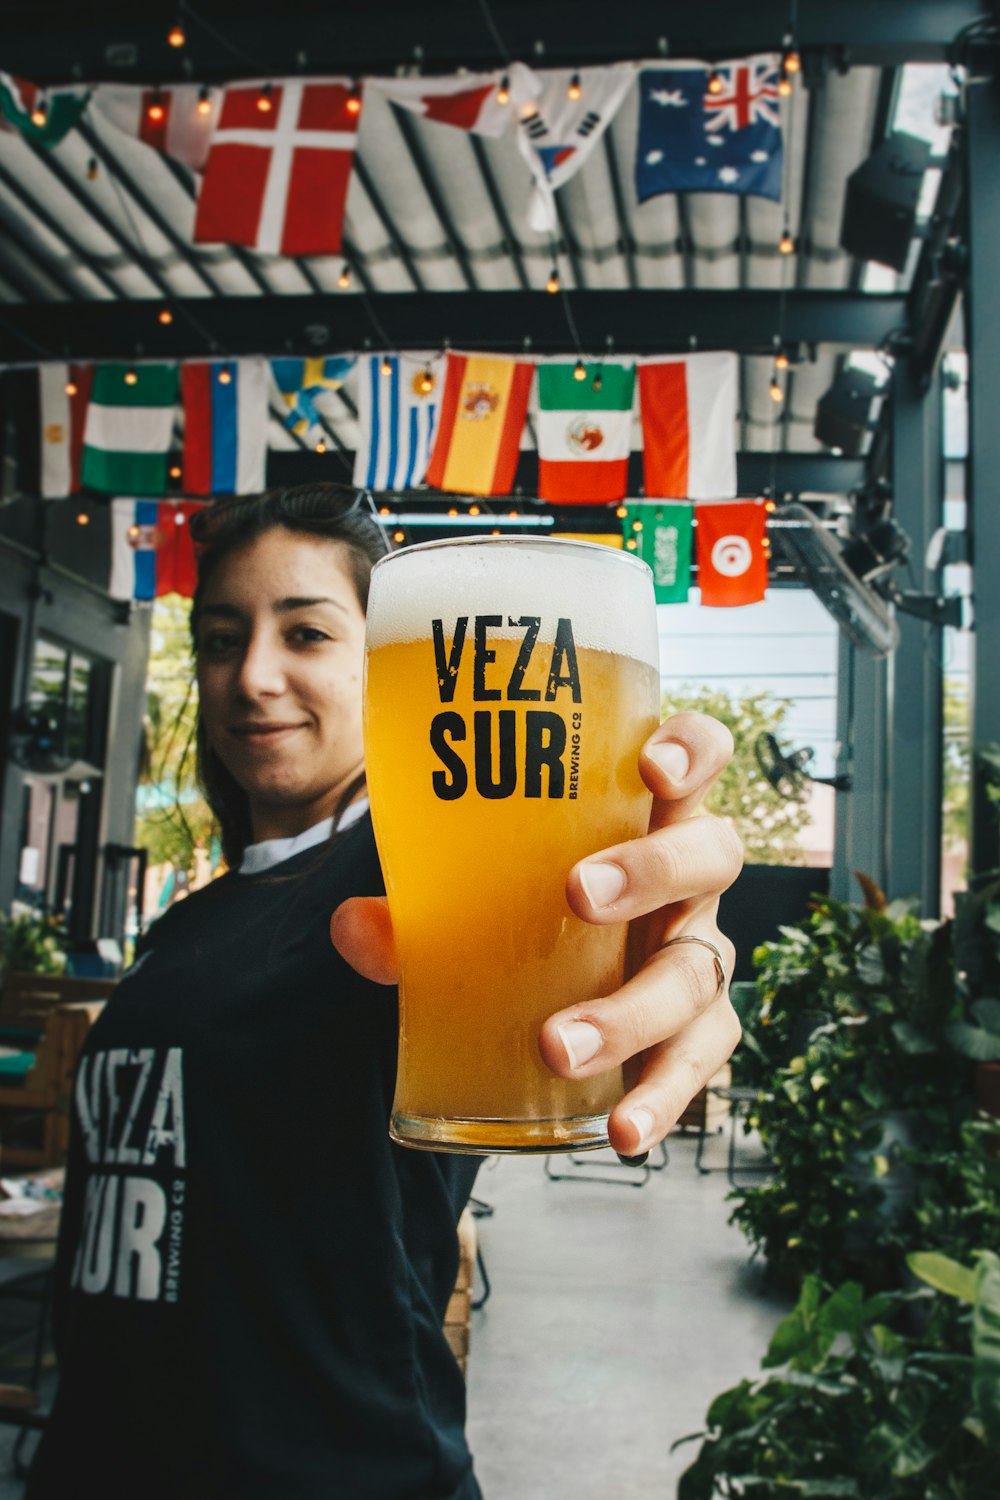 filtered photography of woman holding beer-filled Veza Suri pilsener glass